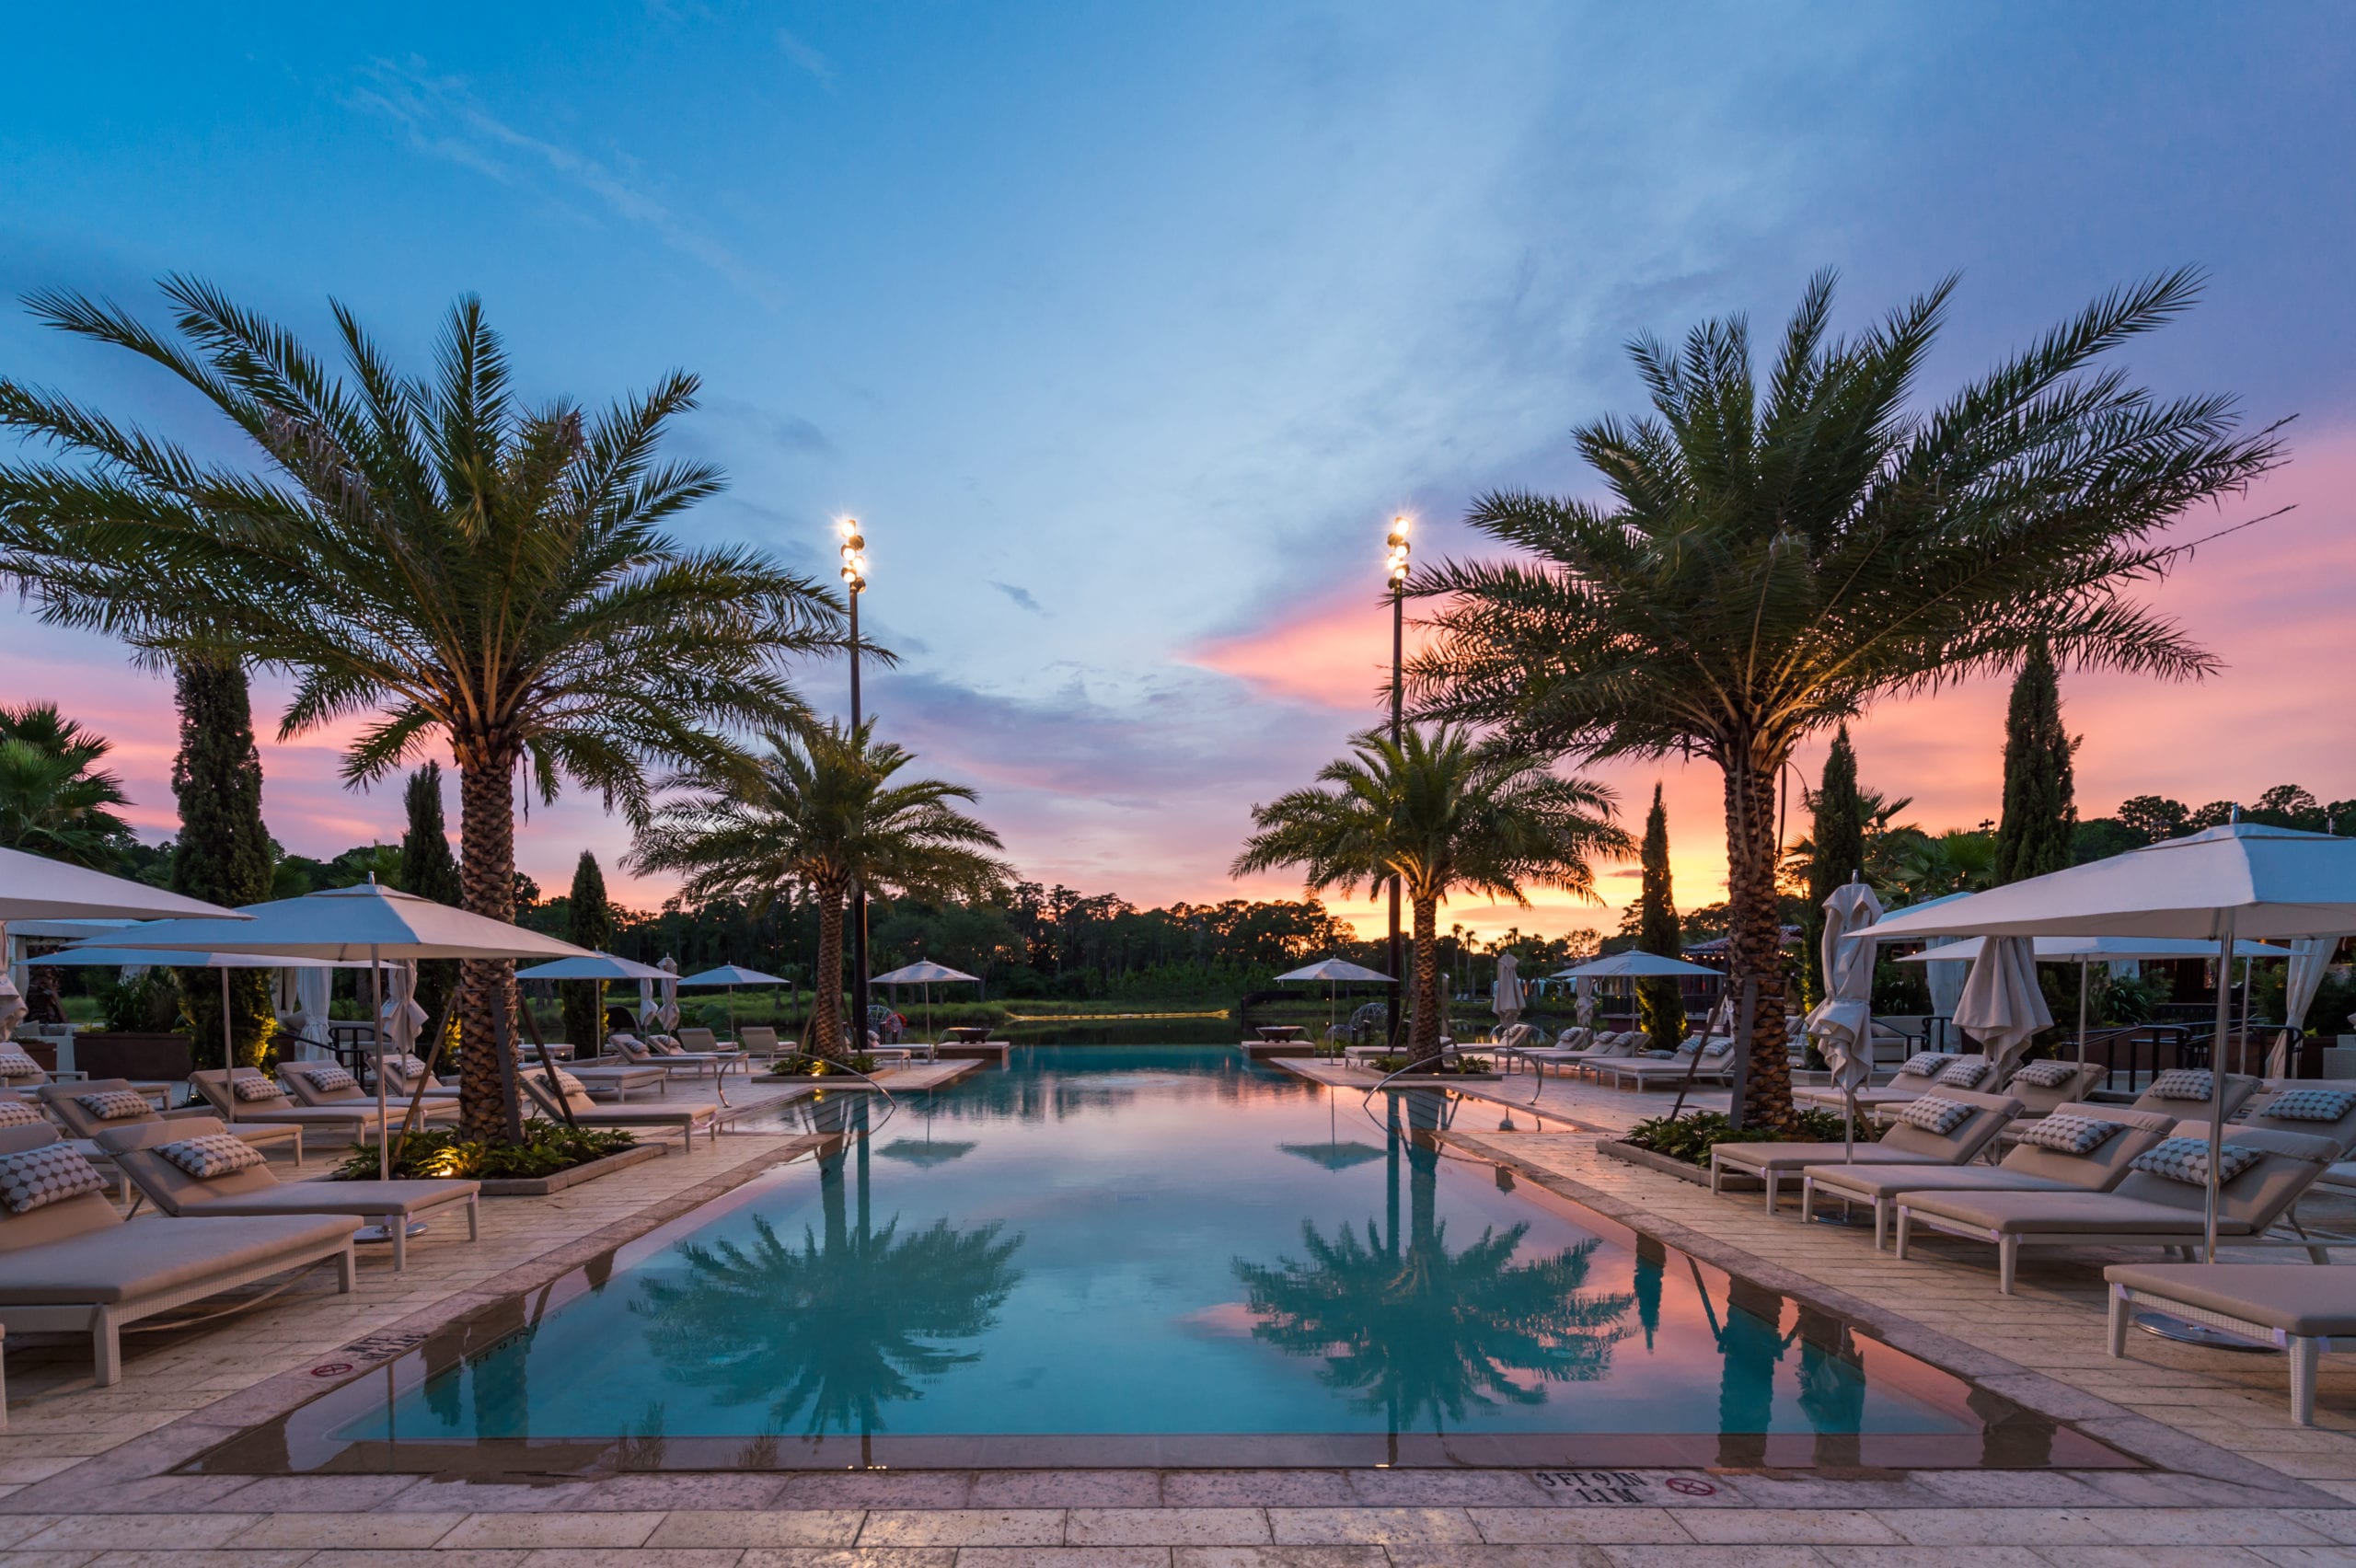 Four Seasons Pool area with lounge furniture and palm trees along with pool at dusk